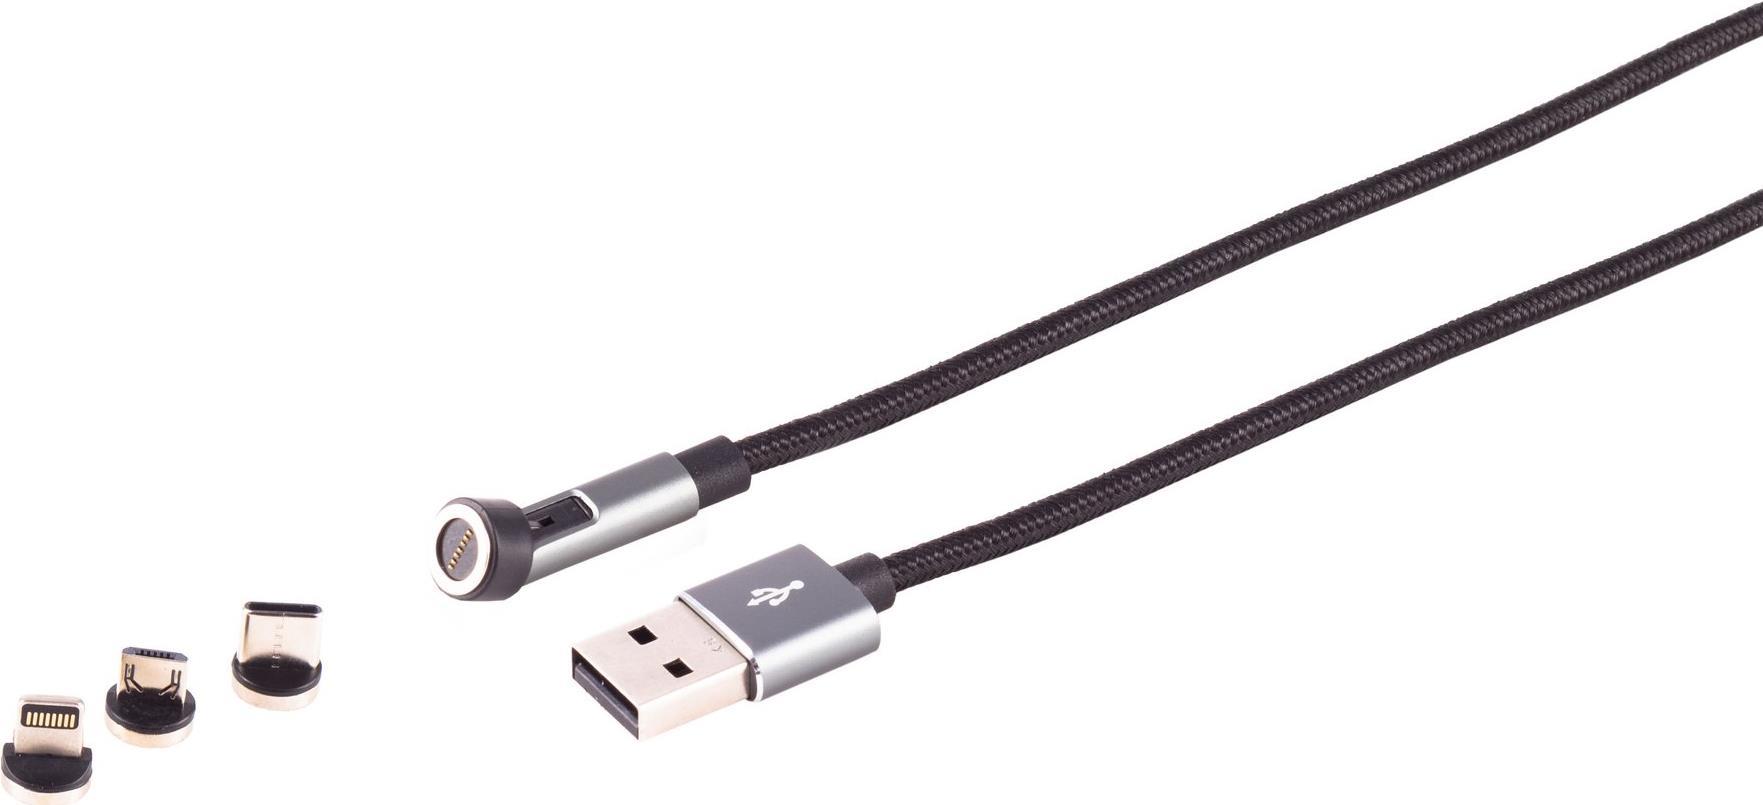 S/CONN maximum connectivity Universal–USB-A Magnetkabel, 3in1, 540°, 7-Pin, weiß, 2,0m (14-19011)